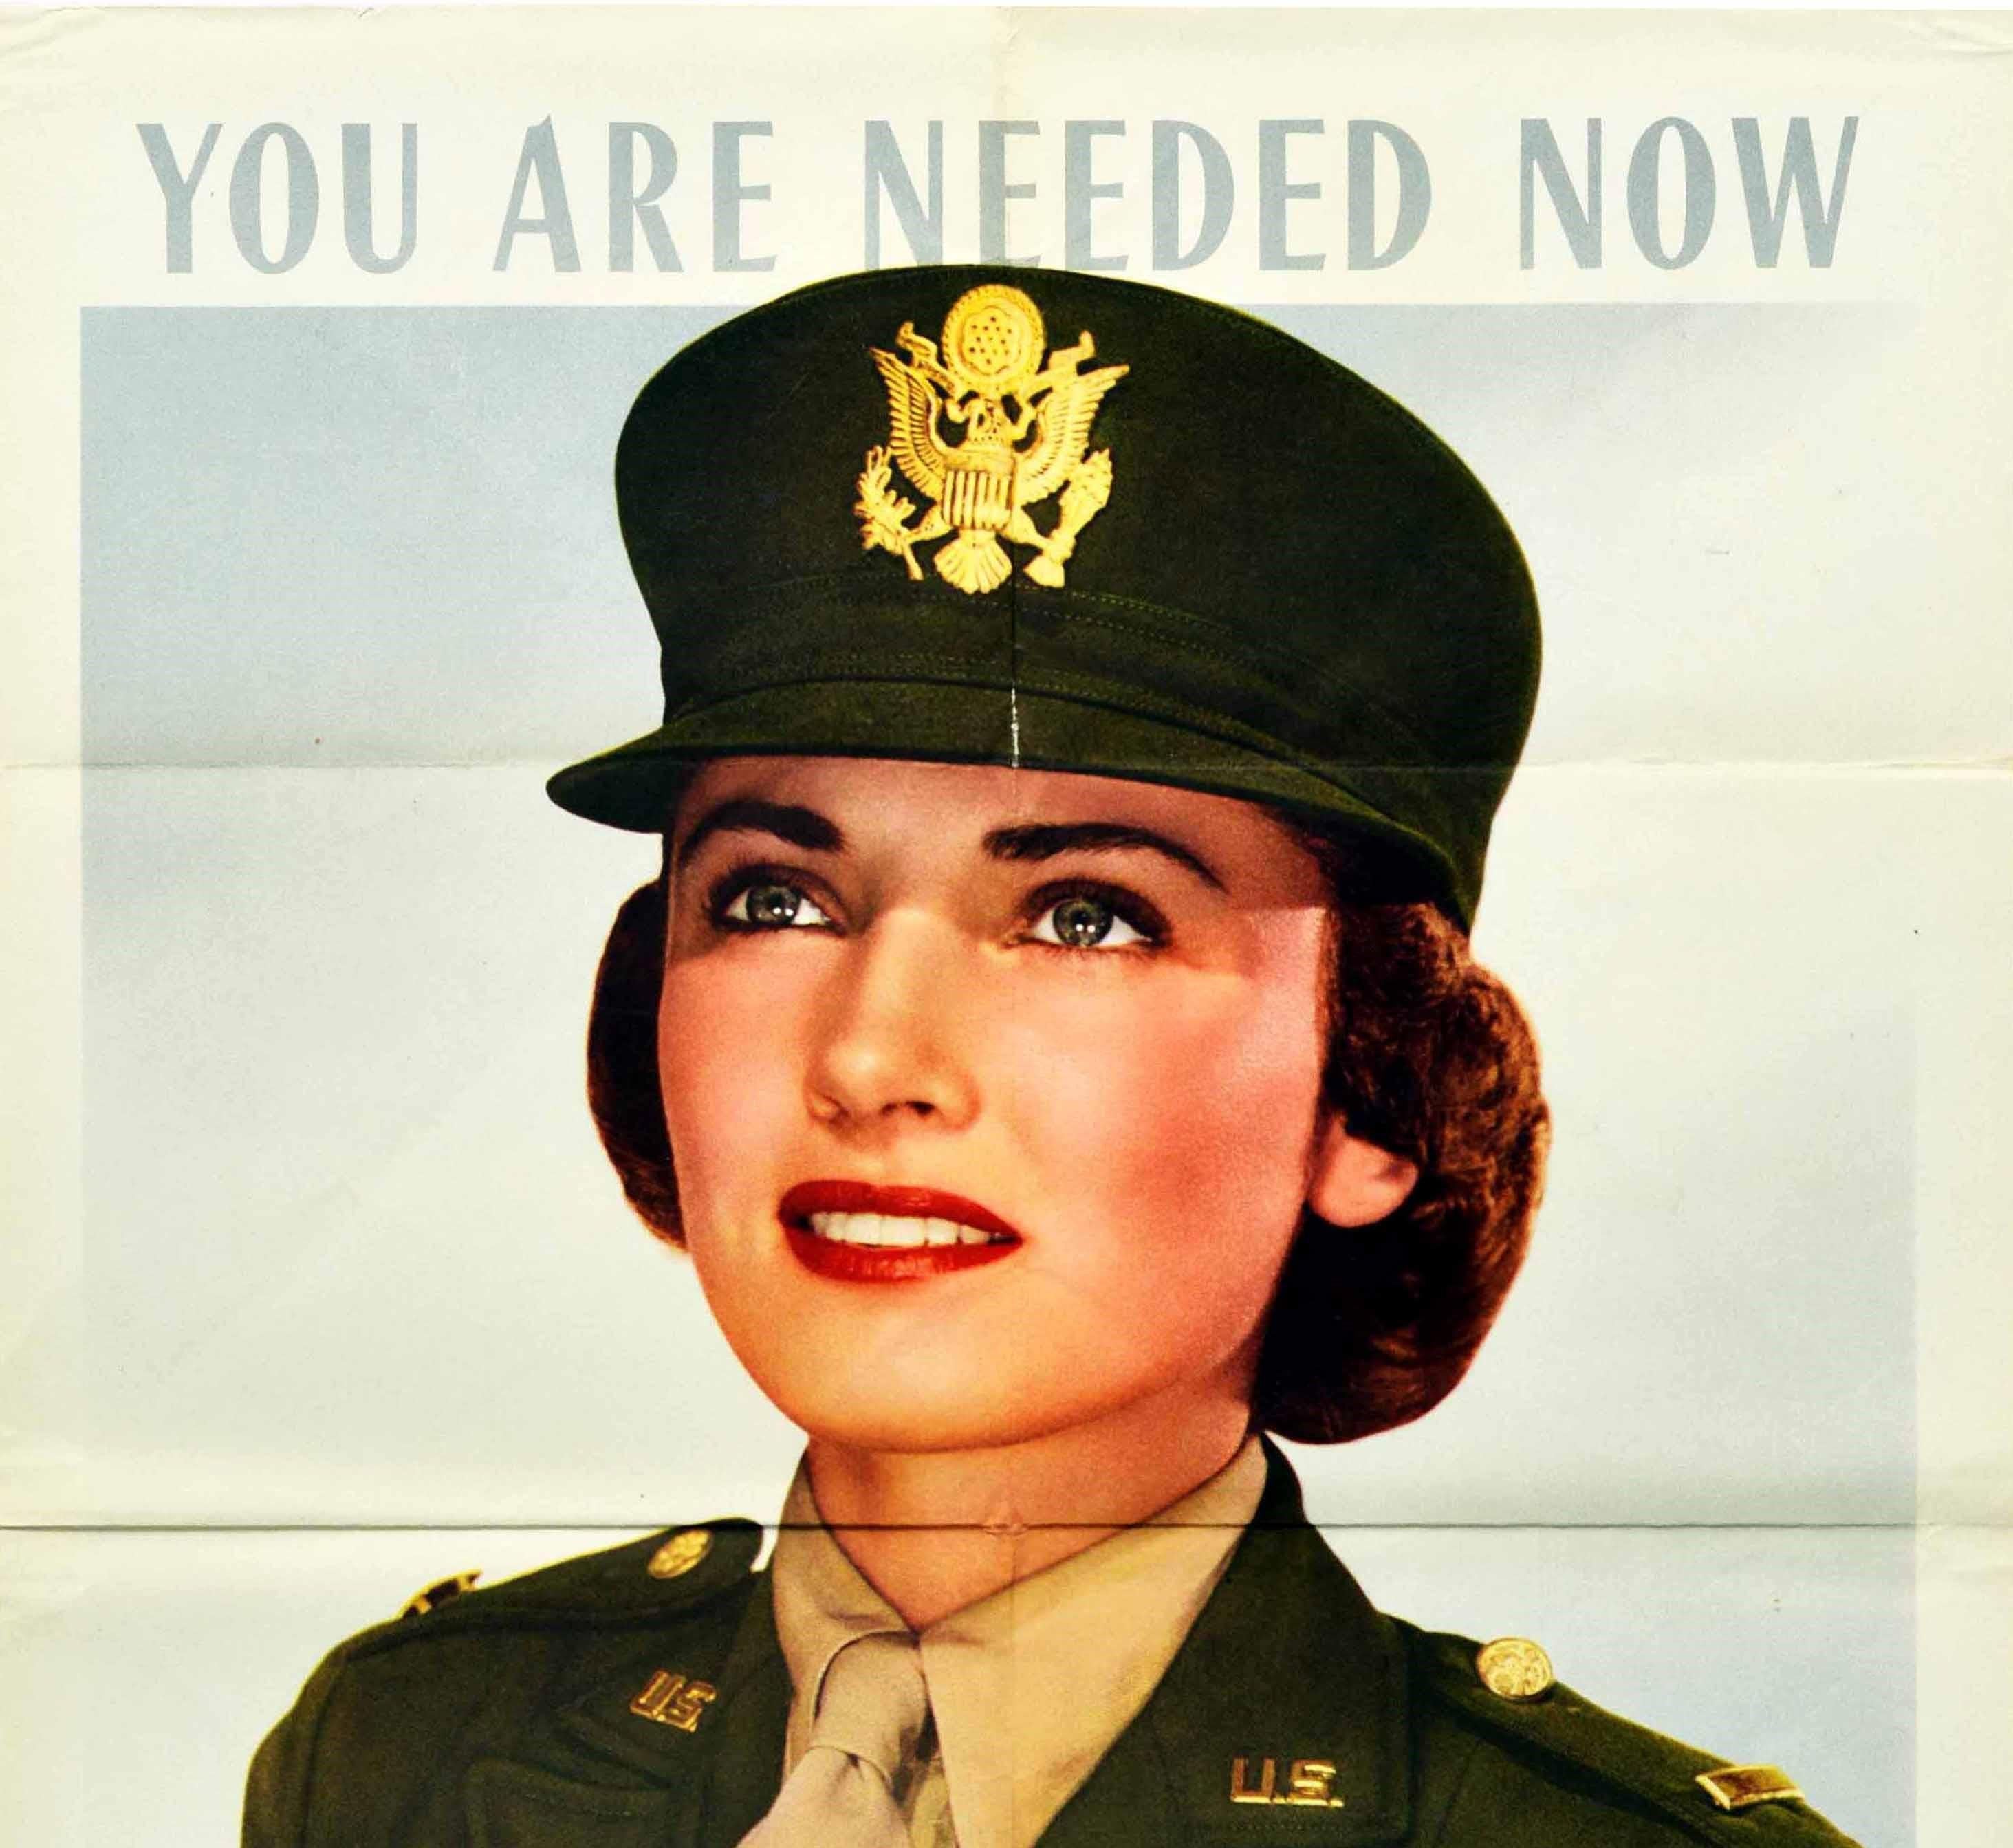 Original Vintage Poster Join The Army Nurse Corps WWII Red Cross Recruitment USA - Print by Ruzzie Green